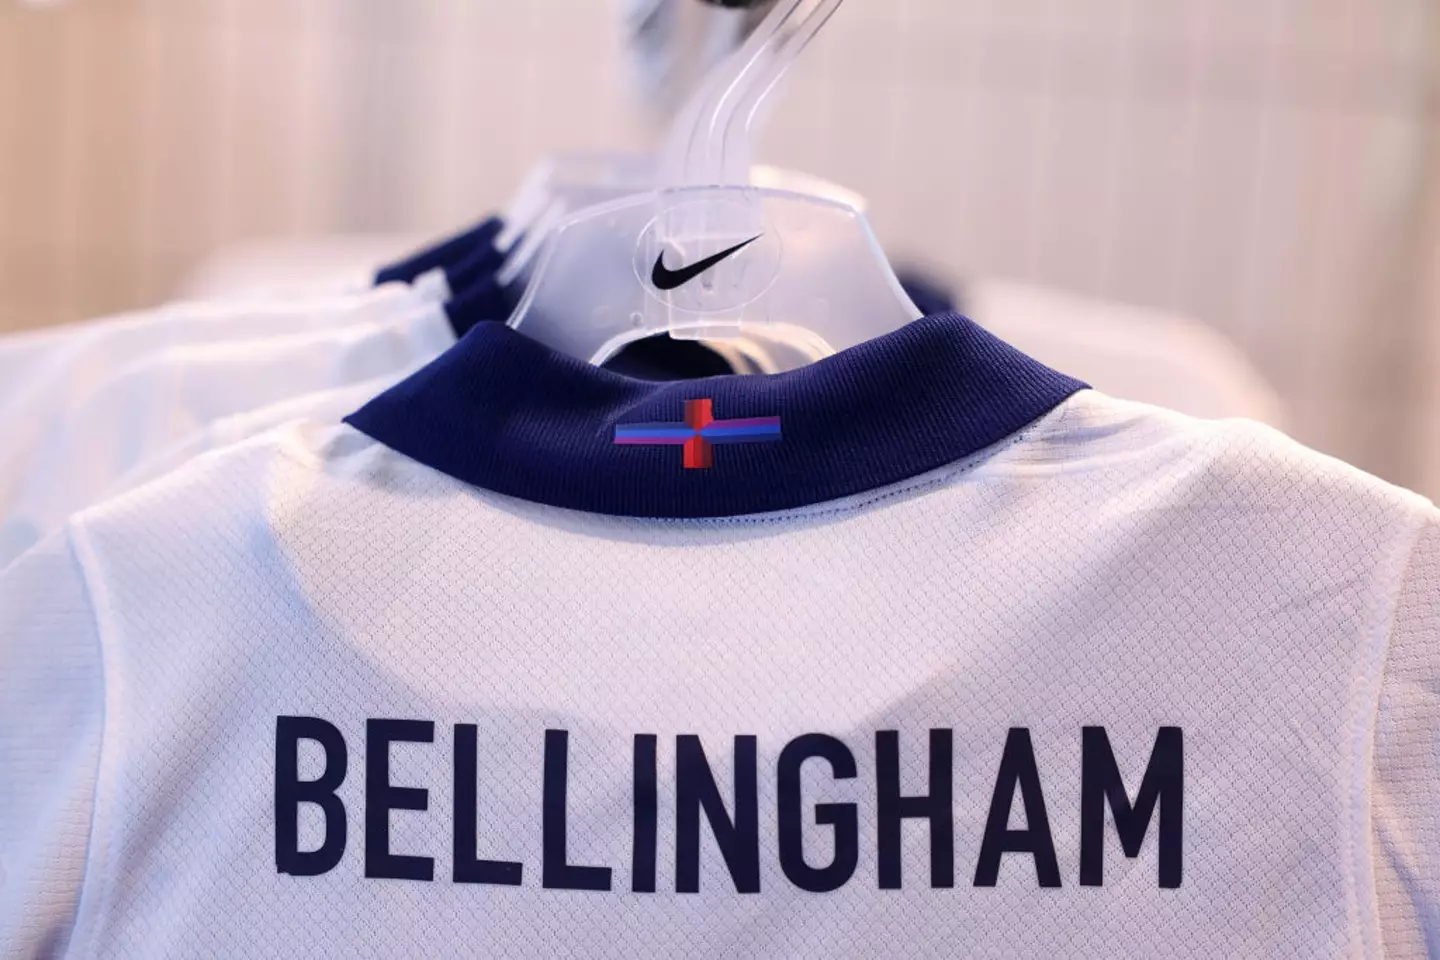 The kit features a controversial redesign of St George's cross (Image: Getty)